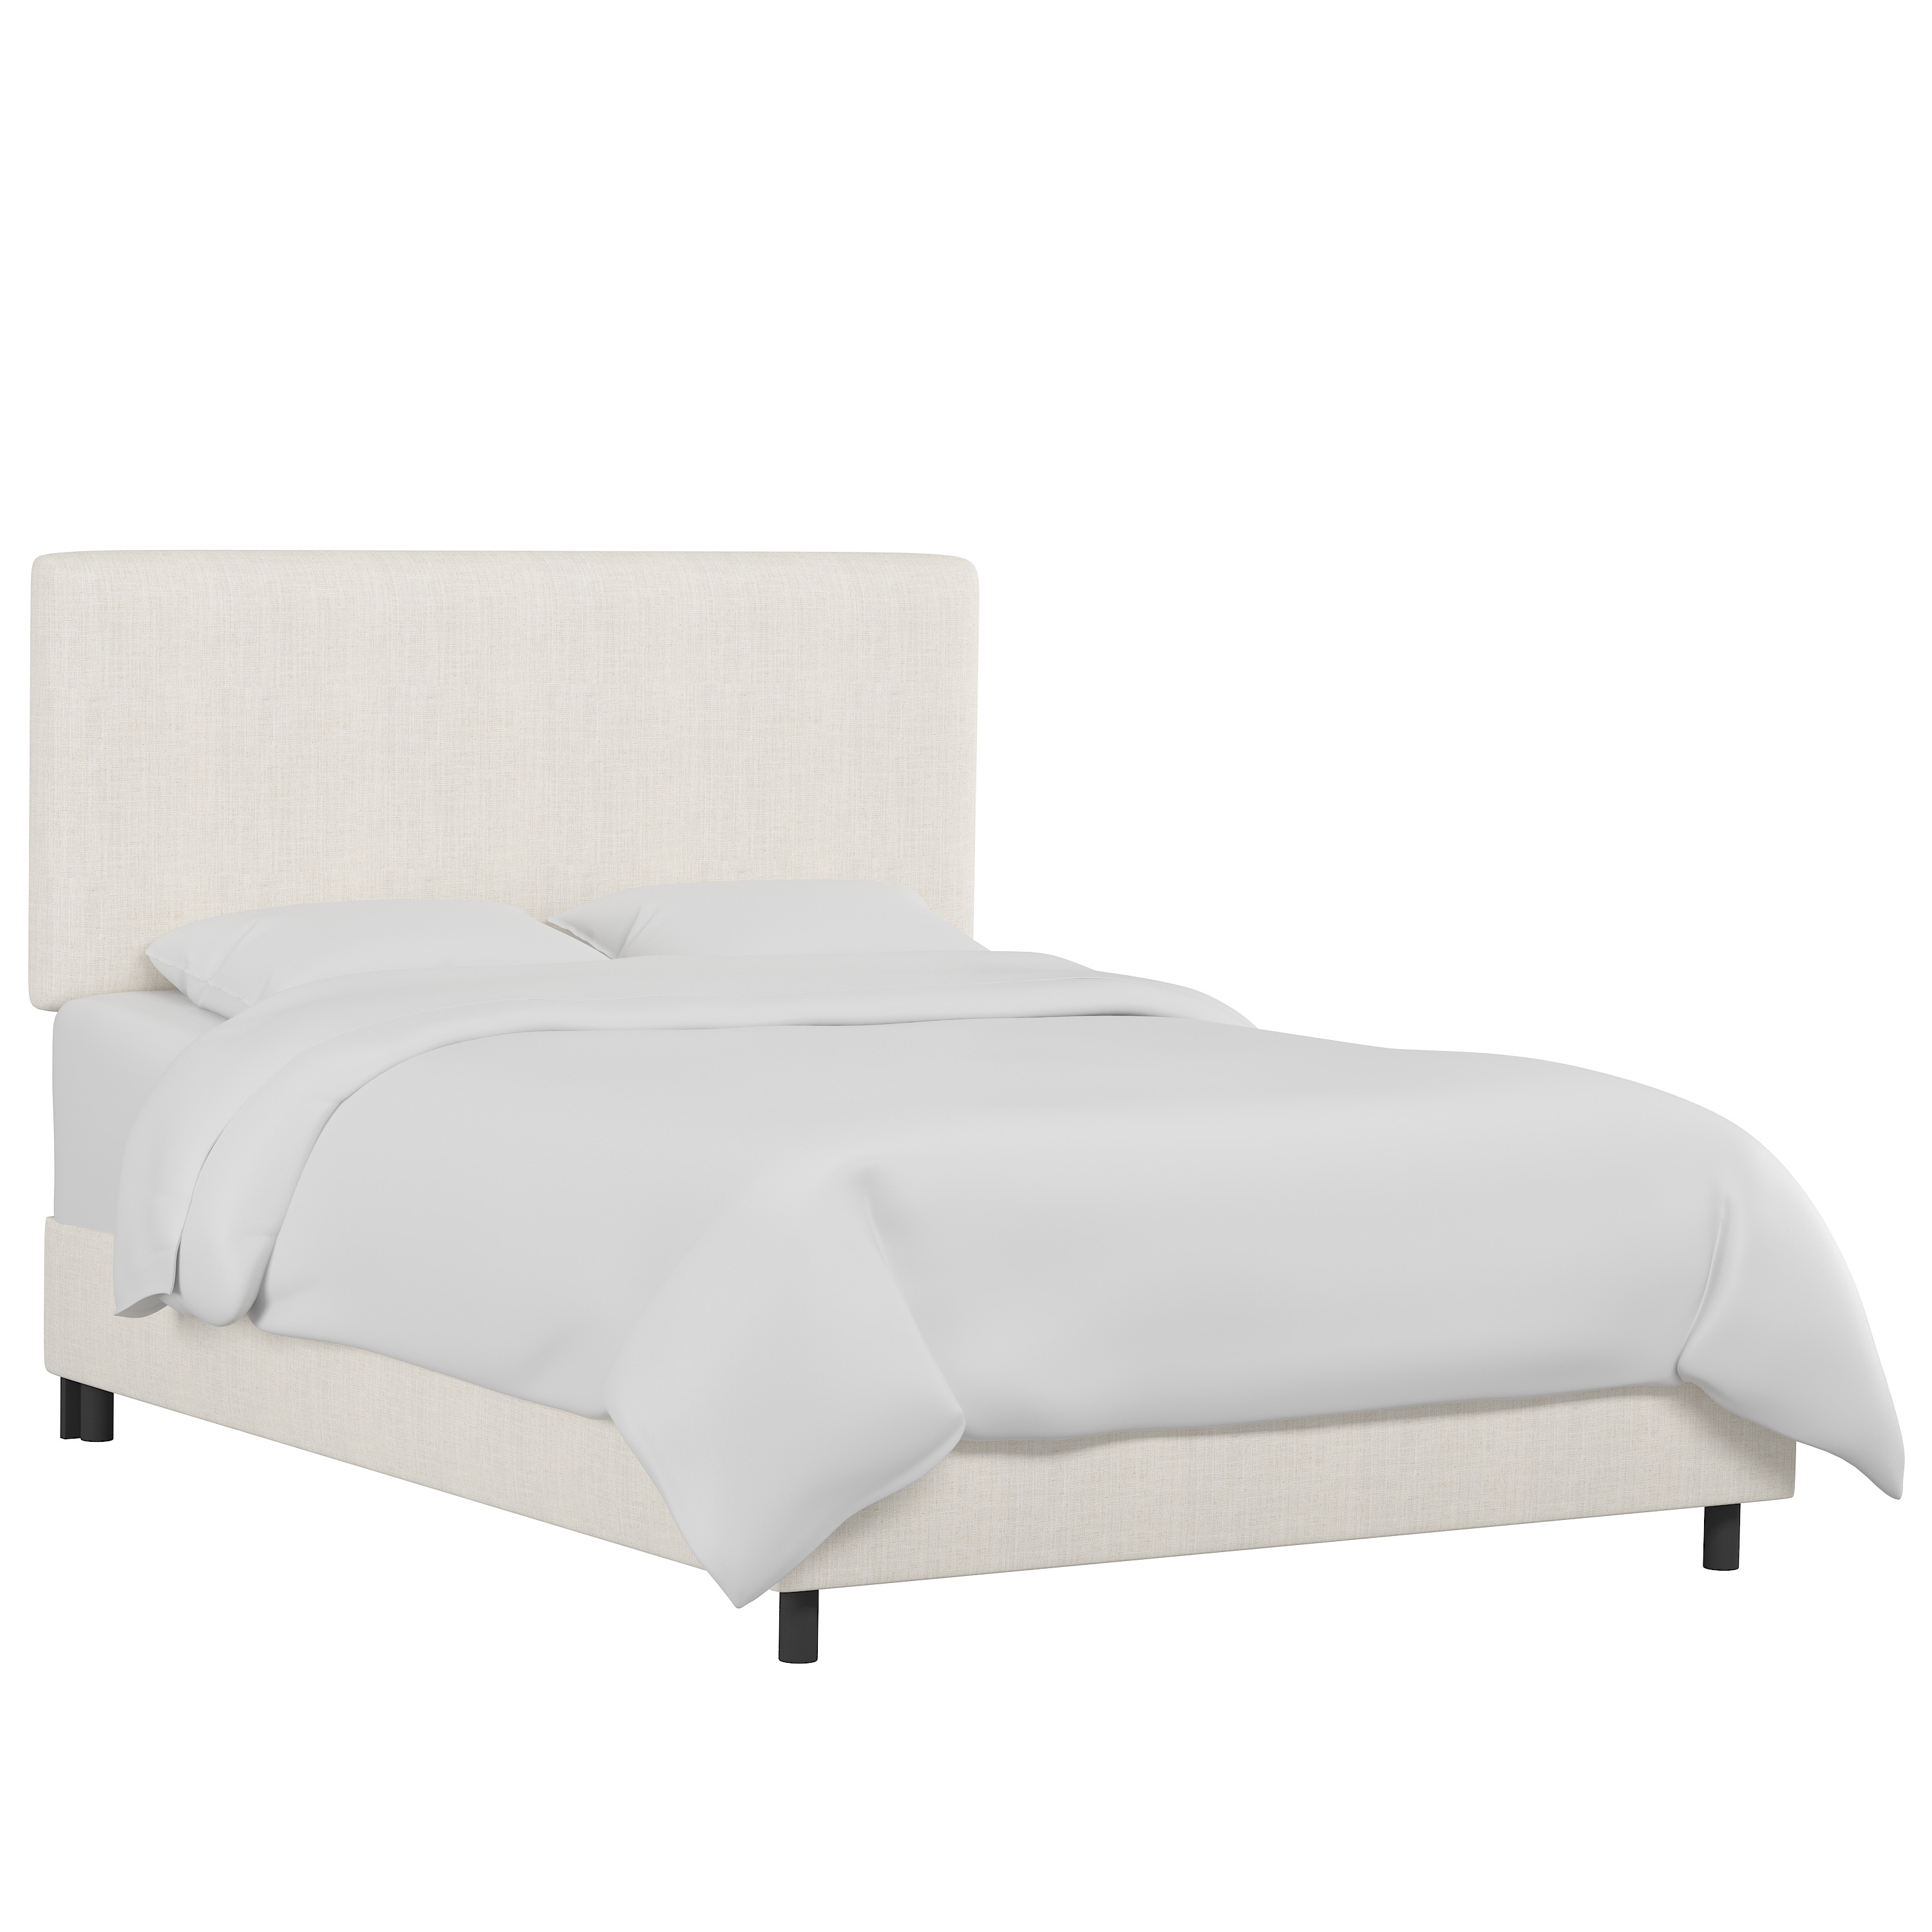 King Sawyer Bed in Linen Talc - Image 1